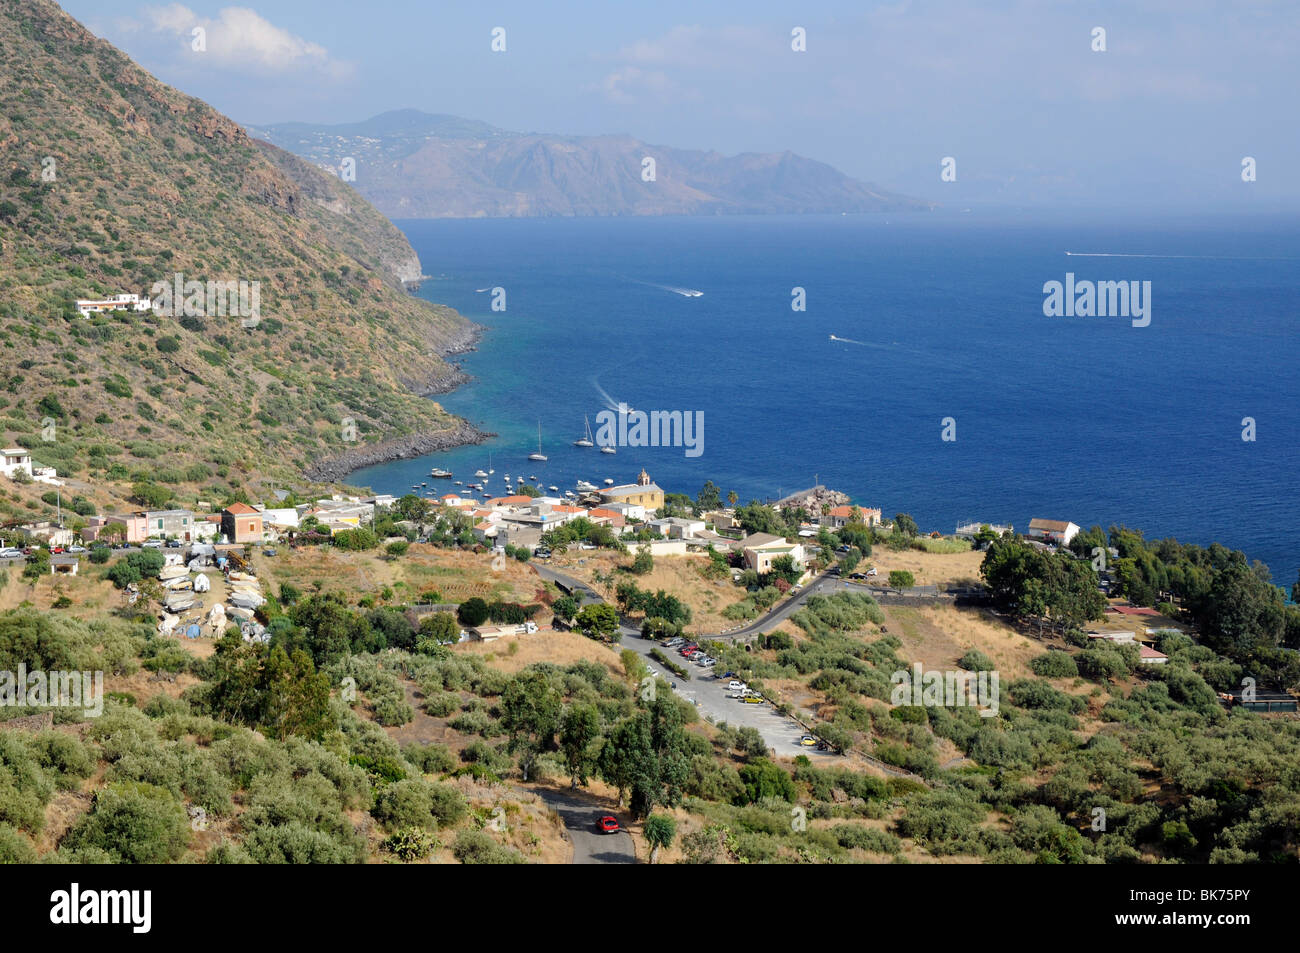 The seaside village of Rinella on the island of Salina (with the island of Lipari in the background), Aeolian Islands, Sicily, Italy. Stock Photo